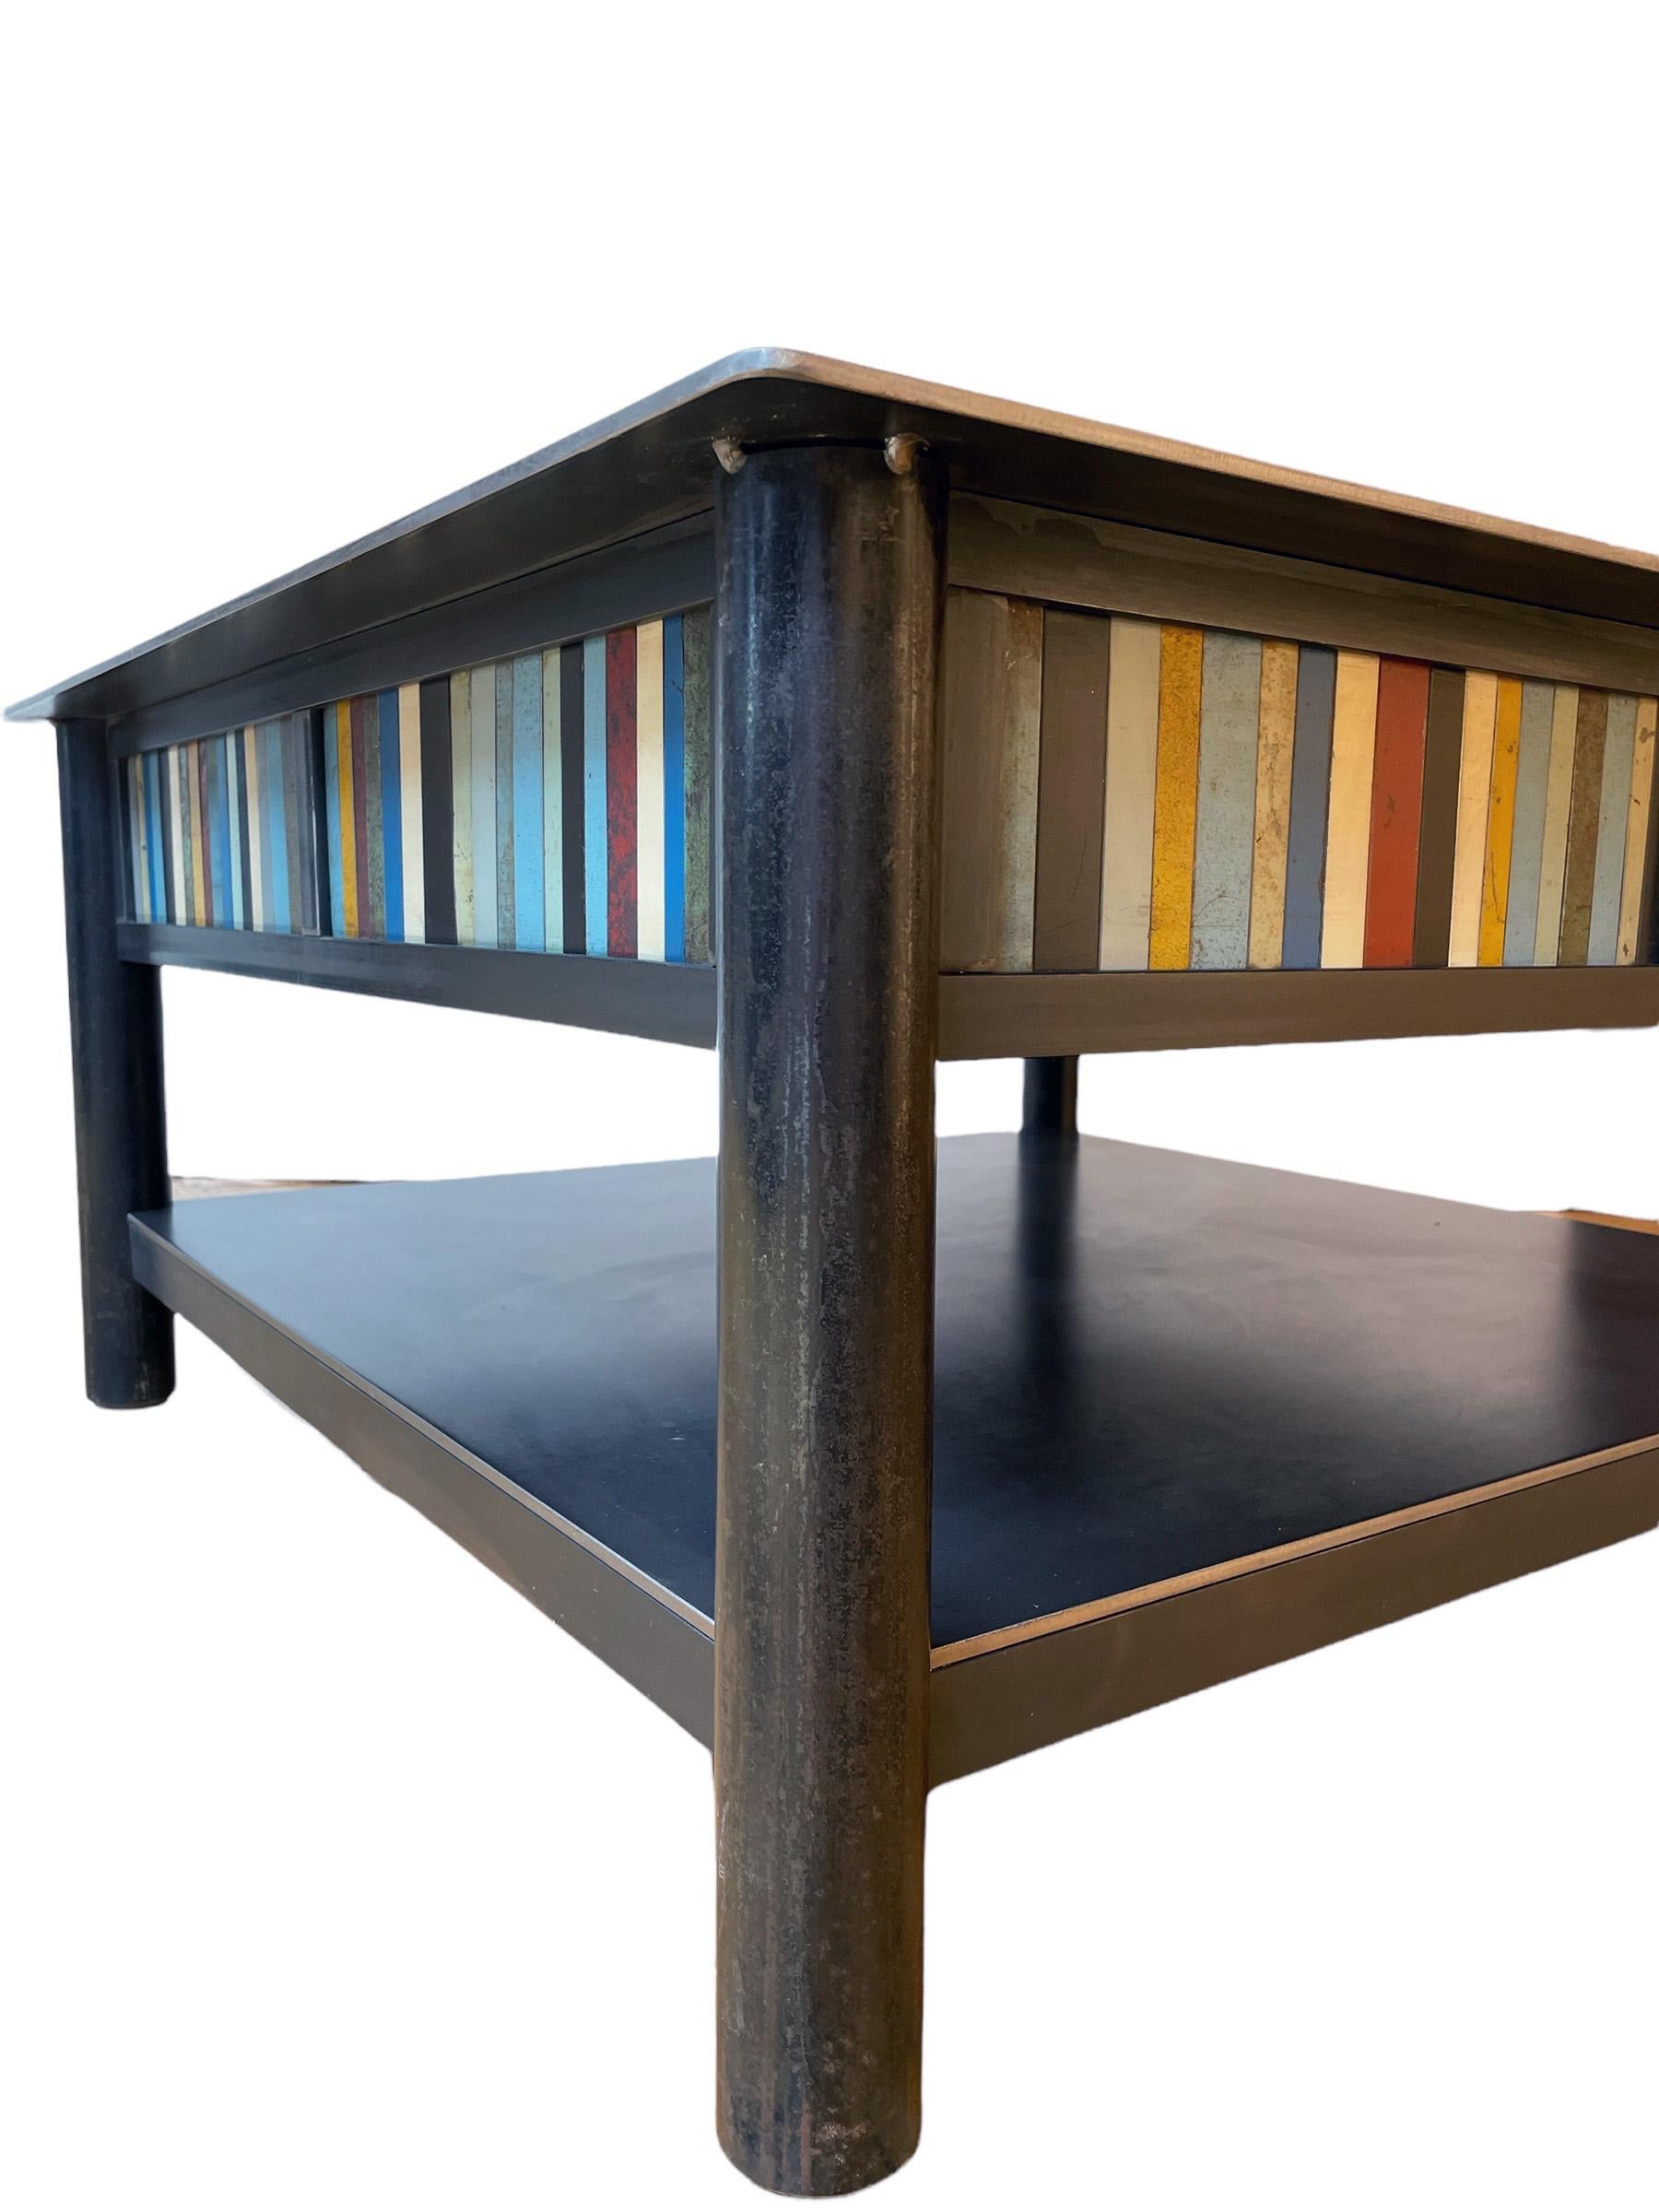 Welded Jim Rose Steel Furniture, Square Coffee Table with Shelf and Multi-Color Panels